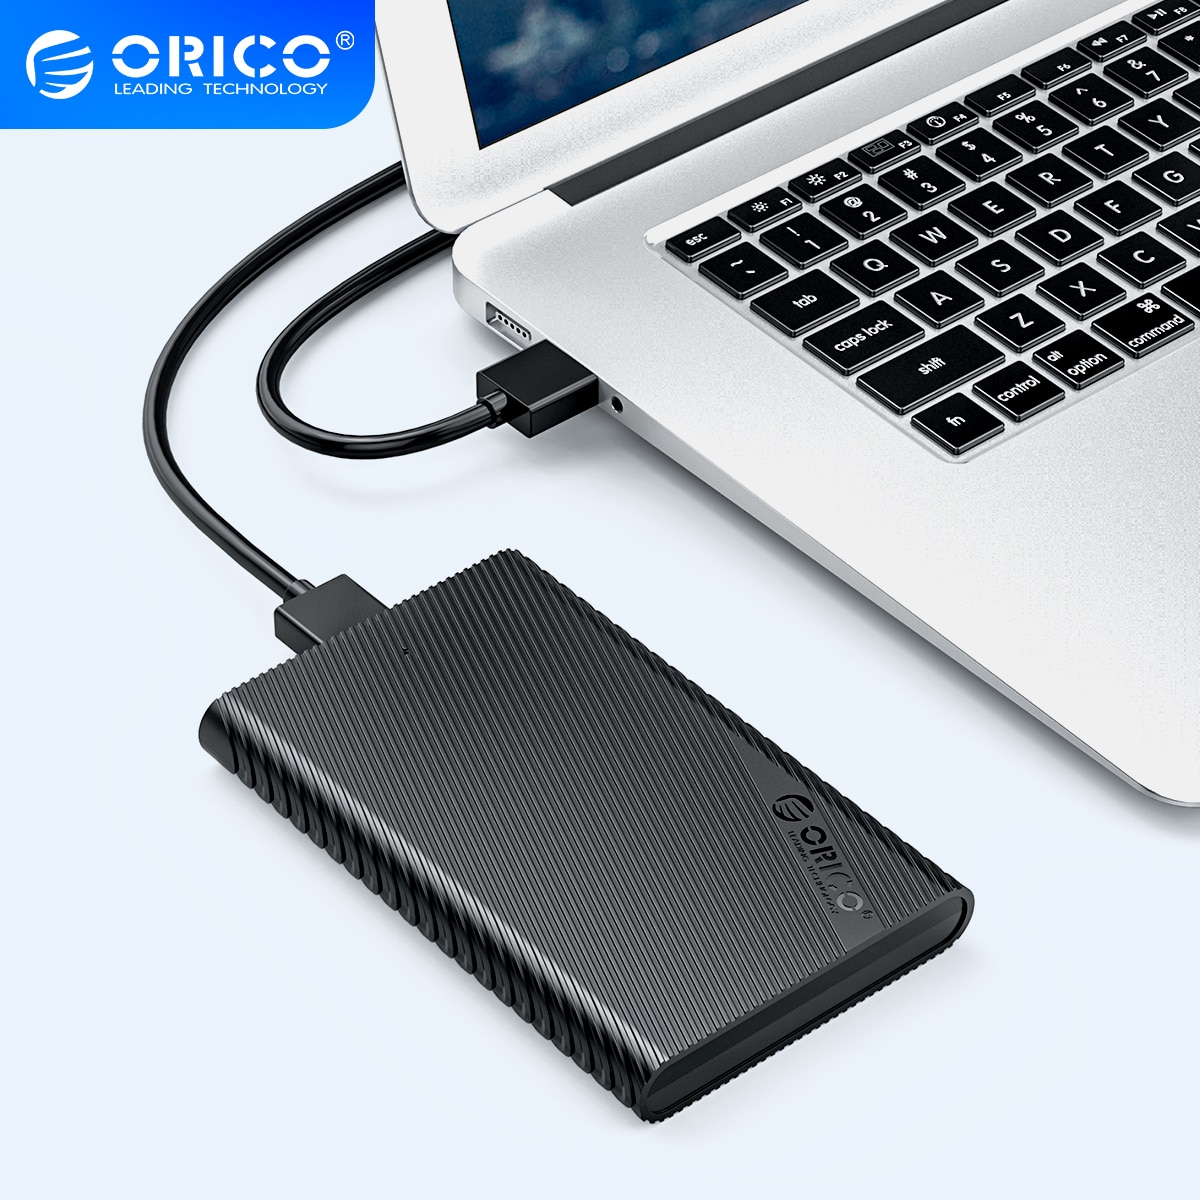 ORICO 2.5 inch Externl HDD Case 5Gbps USB3.0 HDD SSD Adapter with Auto Sleep UASP 4TB HDD Enclosure